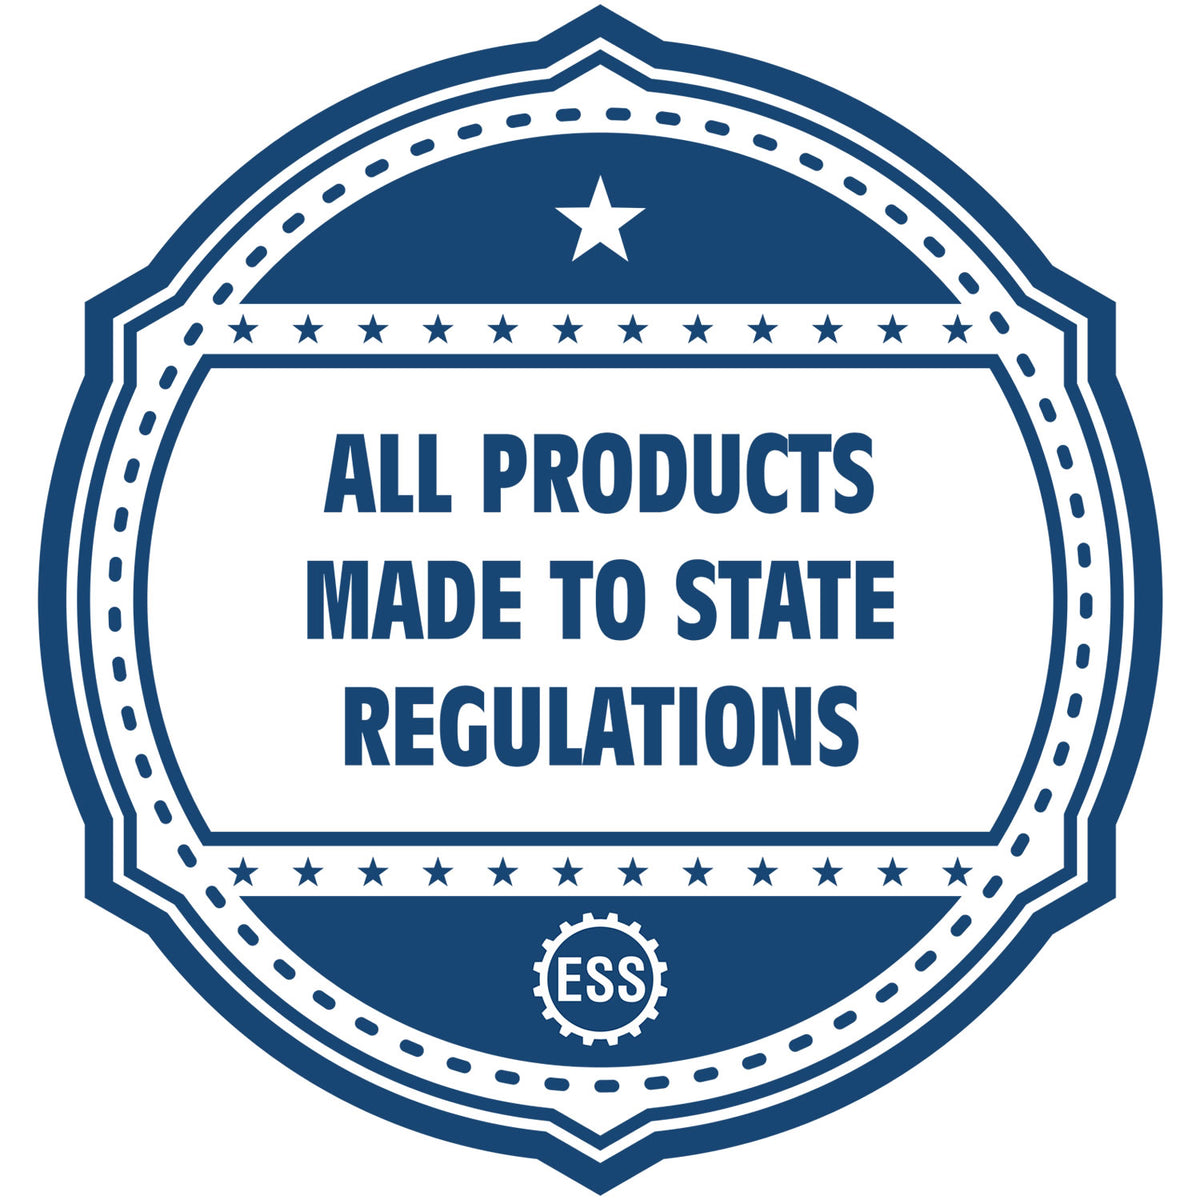 An icon or badge element for the Self-Inking State Seal Texas Notary Stamp showing that this product is made in compliance with state regulations.